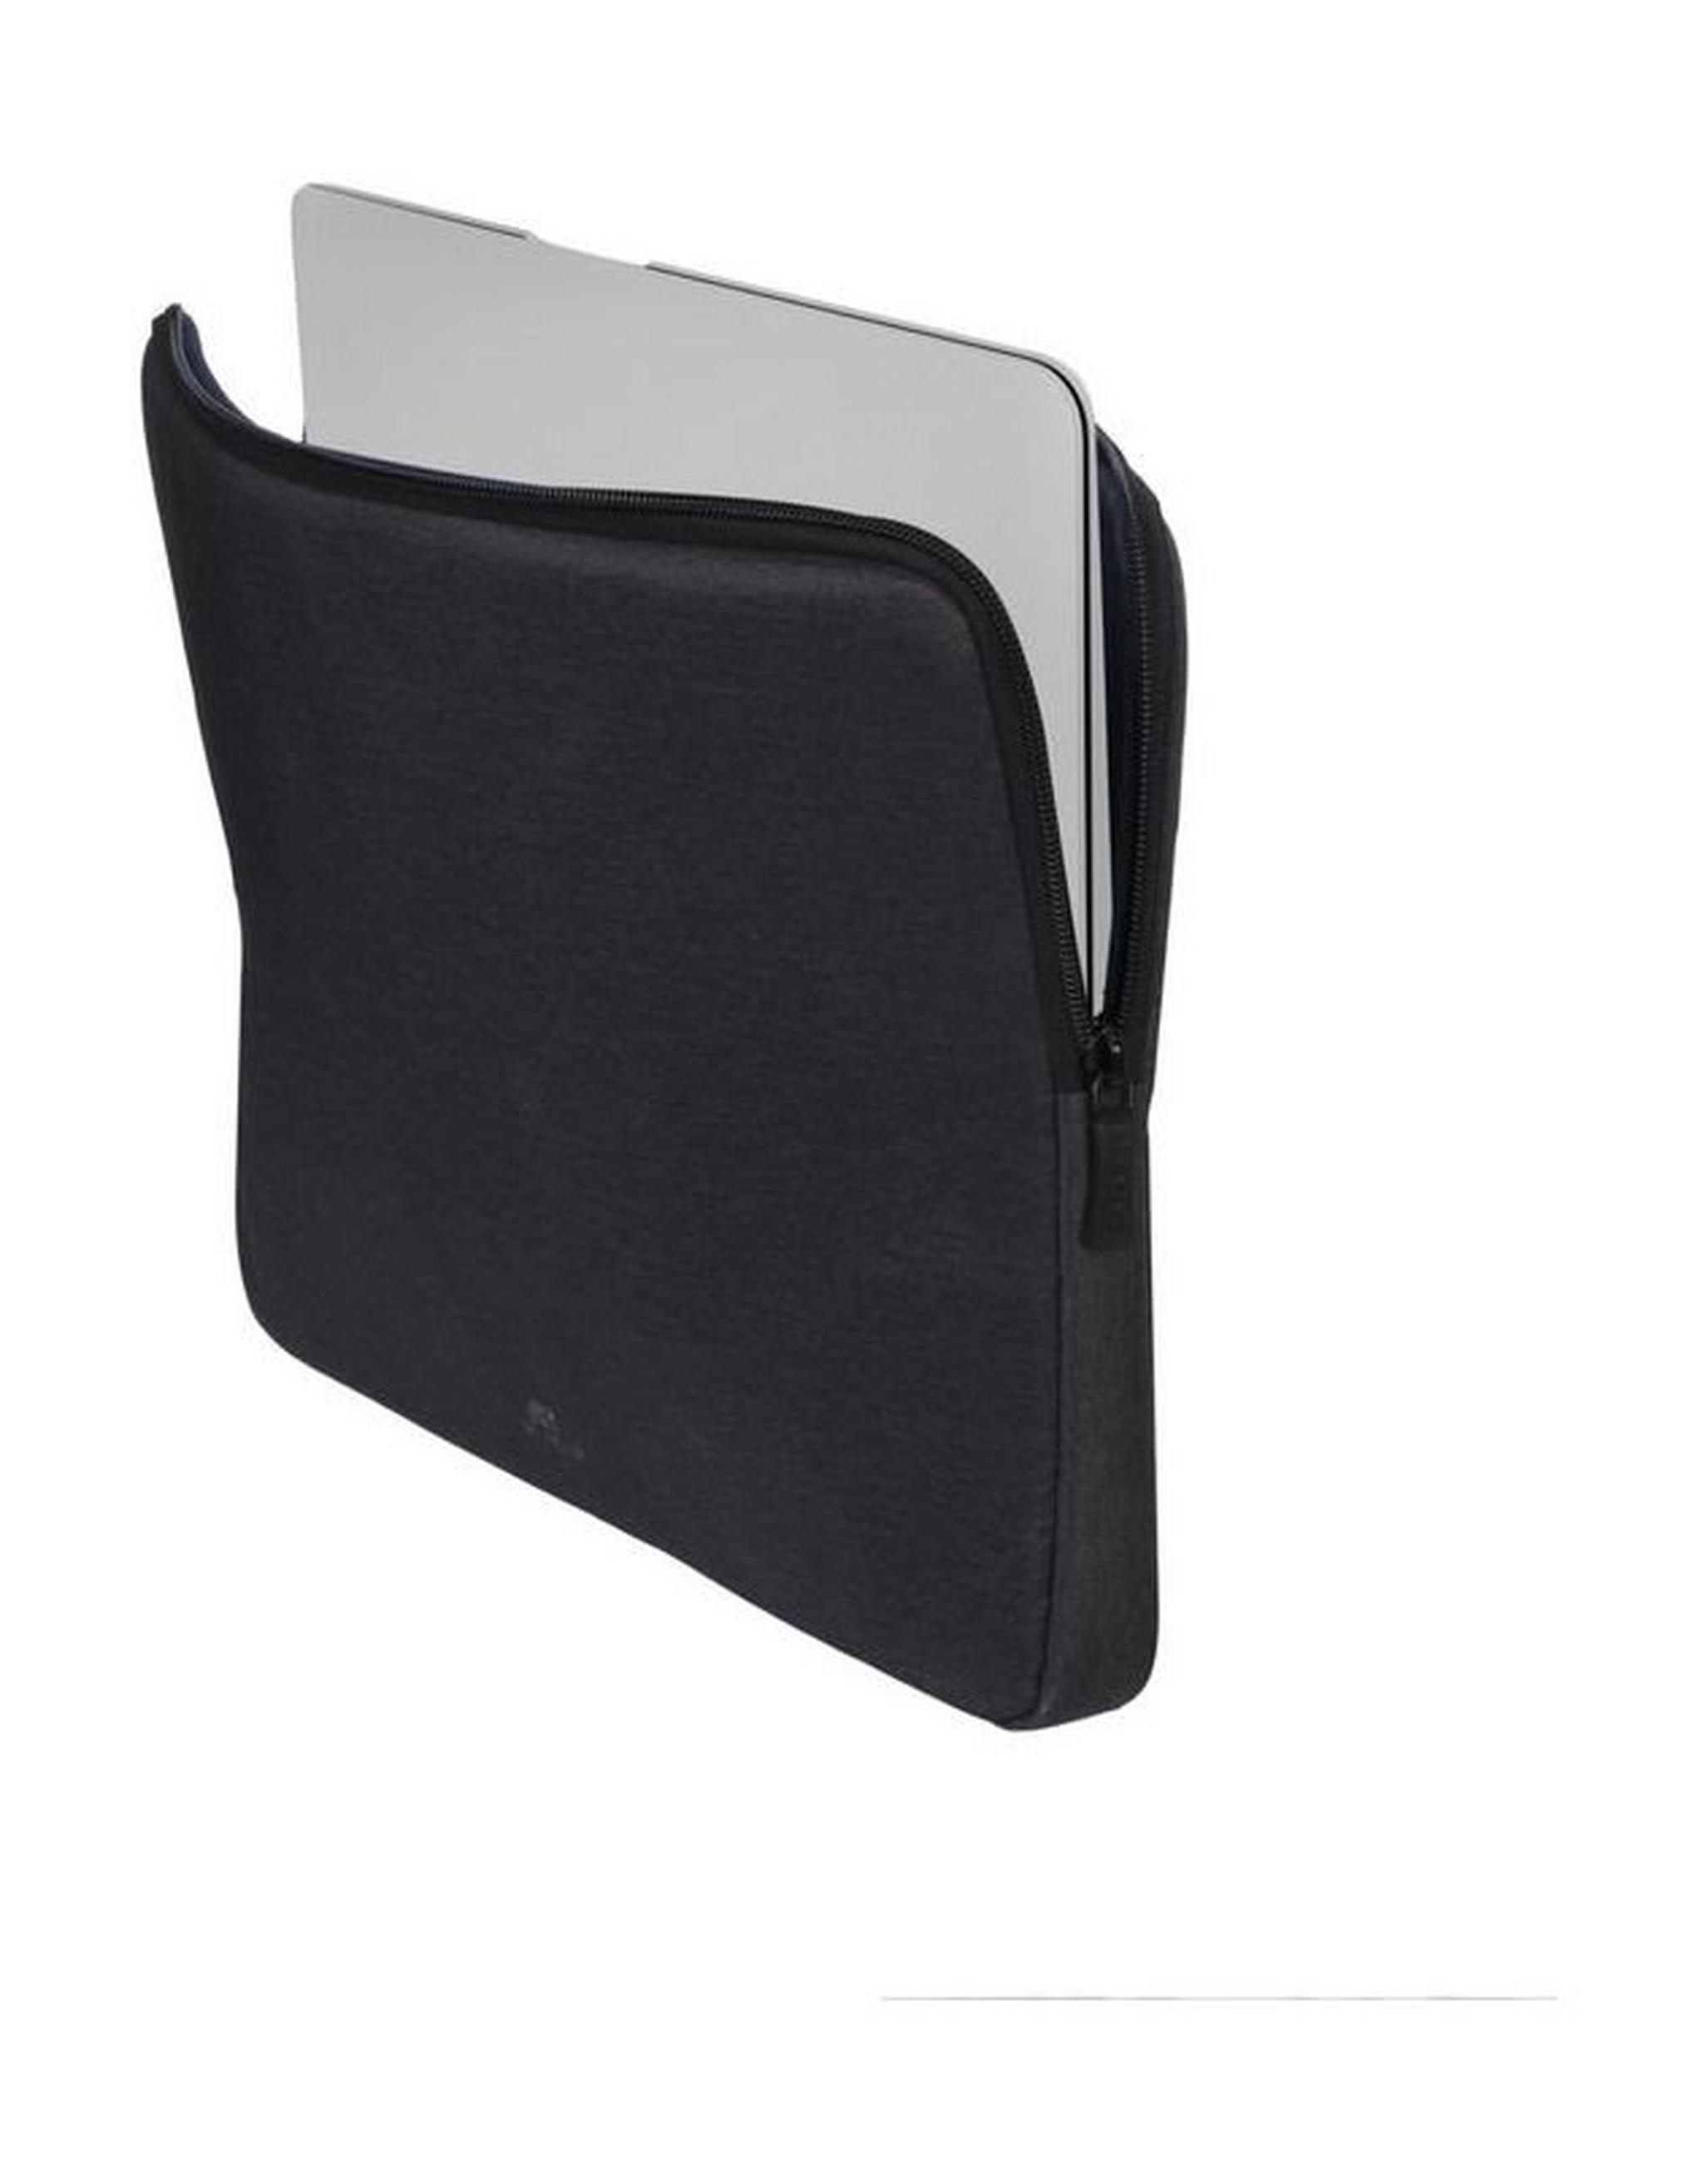 Riva Sleeve For 13.3-inch Laptop (7703) - Black